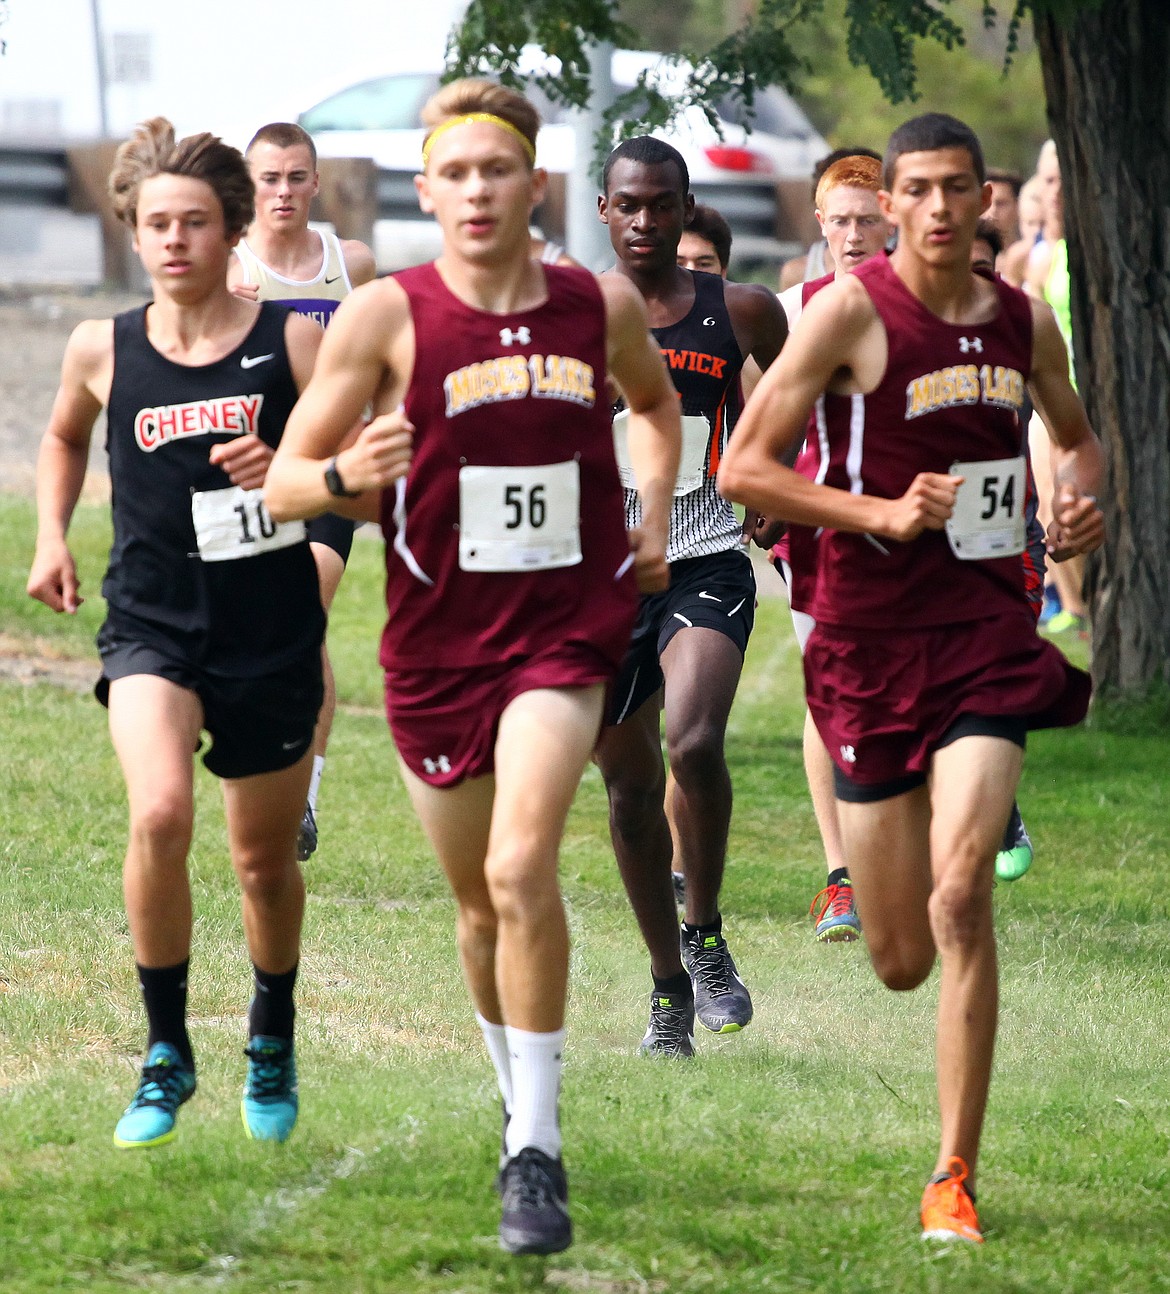 Rodney Harwood/Columbia Basin Herald
Trail of the Sabre award winner Joshua Cooper (54) was the No. 2 runner at the boys varsity race at the Moses Lake Invite.